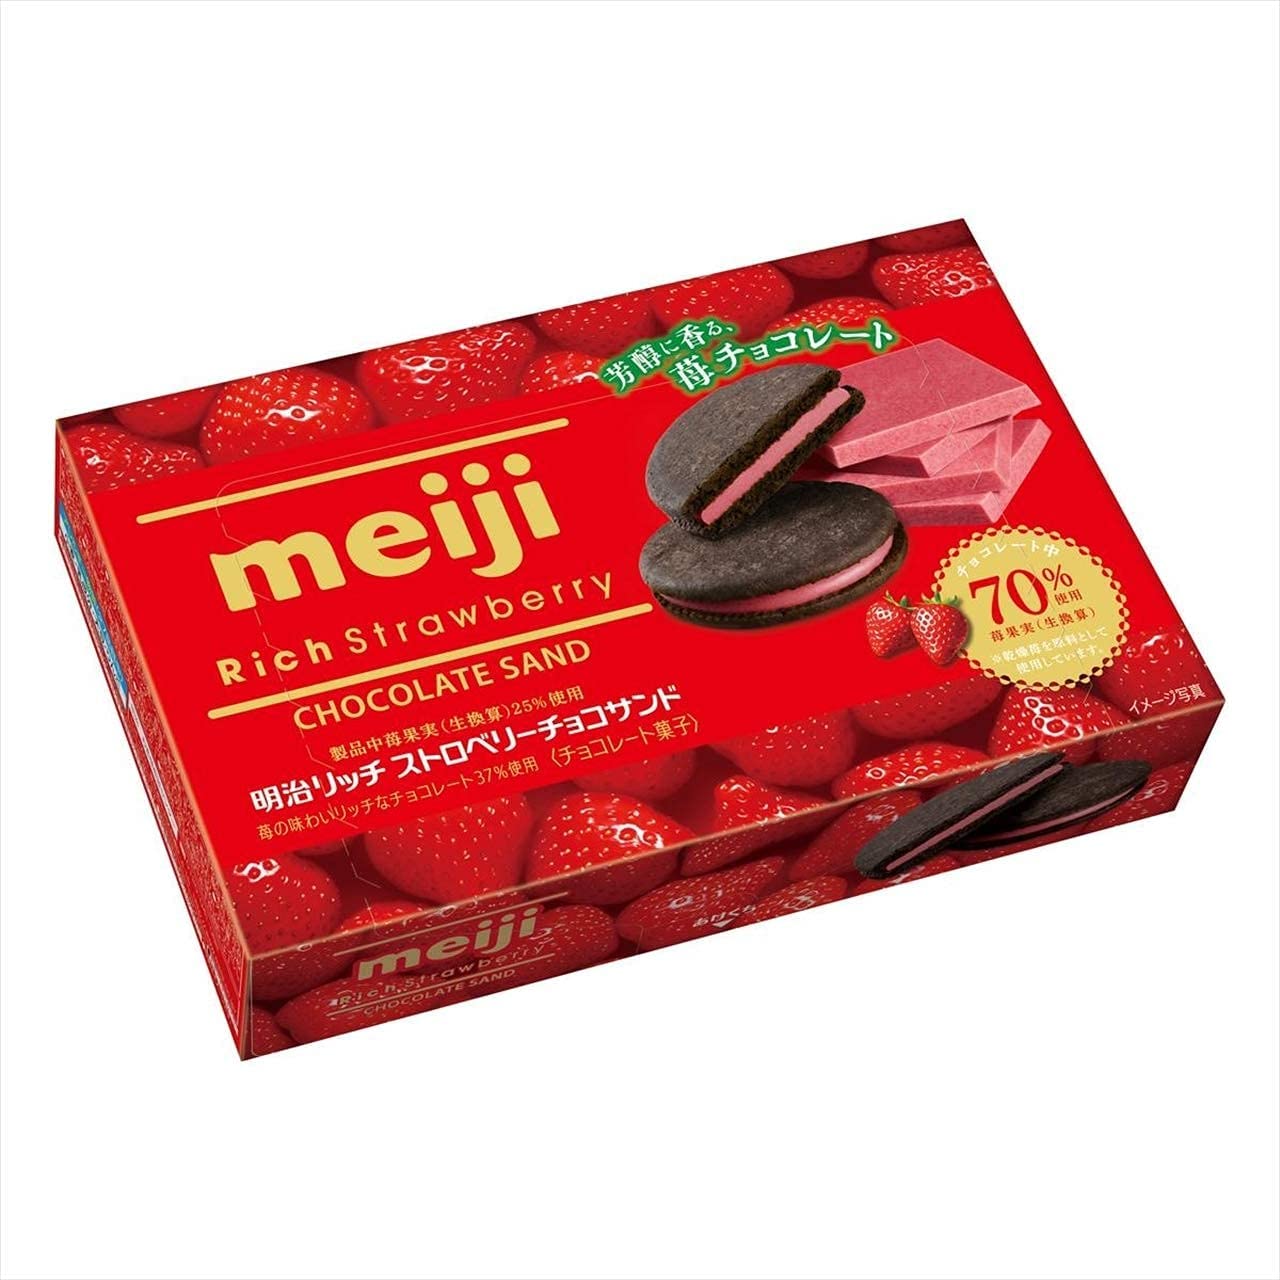 Meiji Rich Chocolate Chocolate Sand Strawberry Sandwich Biscuits (Pack of 5)